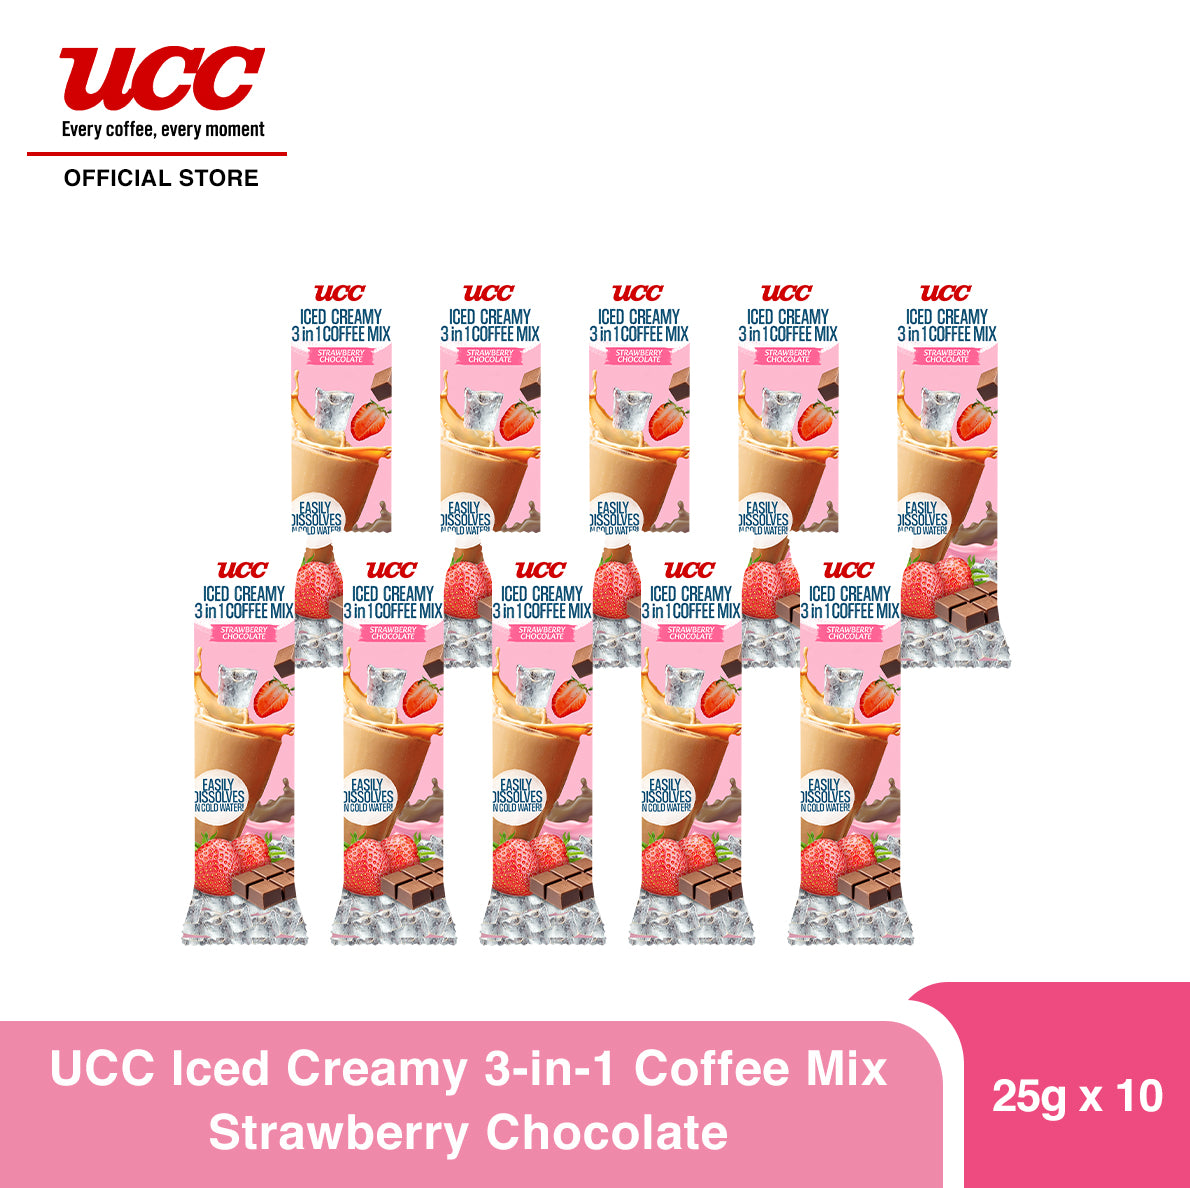 UCC Iced Creamy Fruity Strawberry Chocolate 3-in-1 Coffee Mix